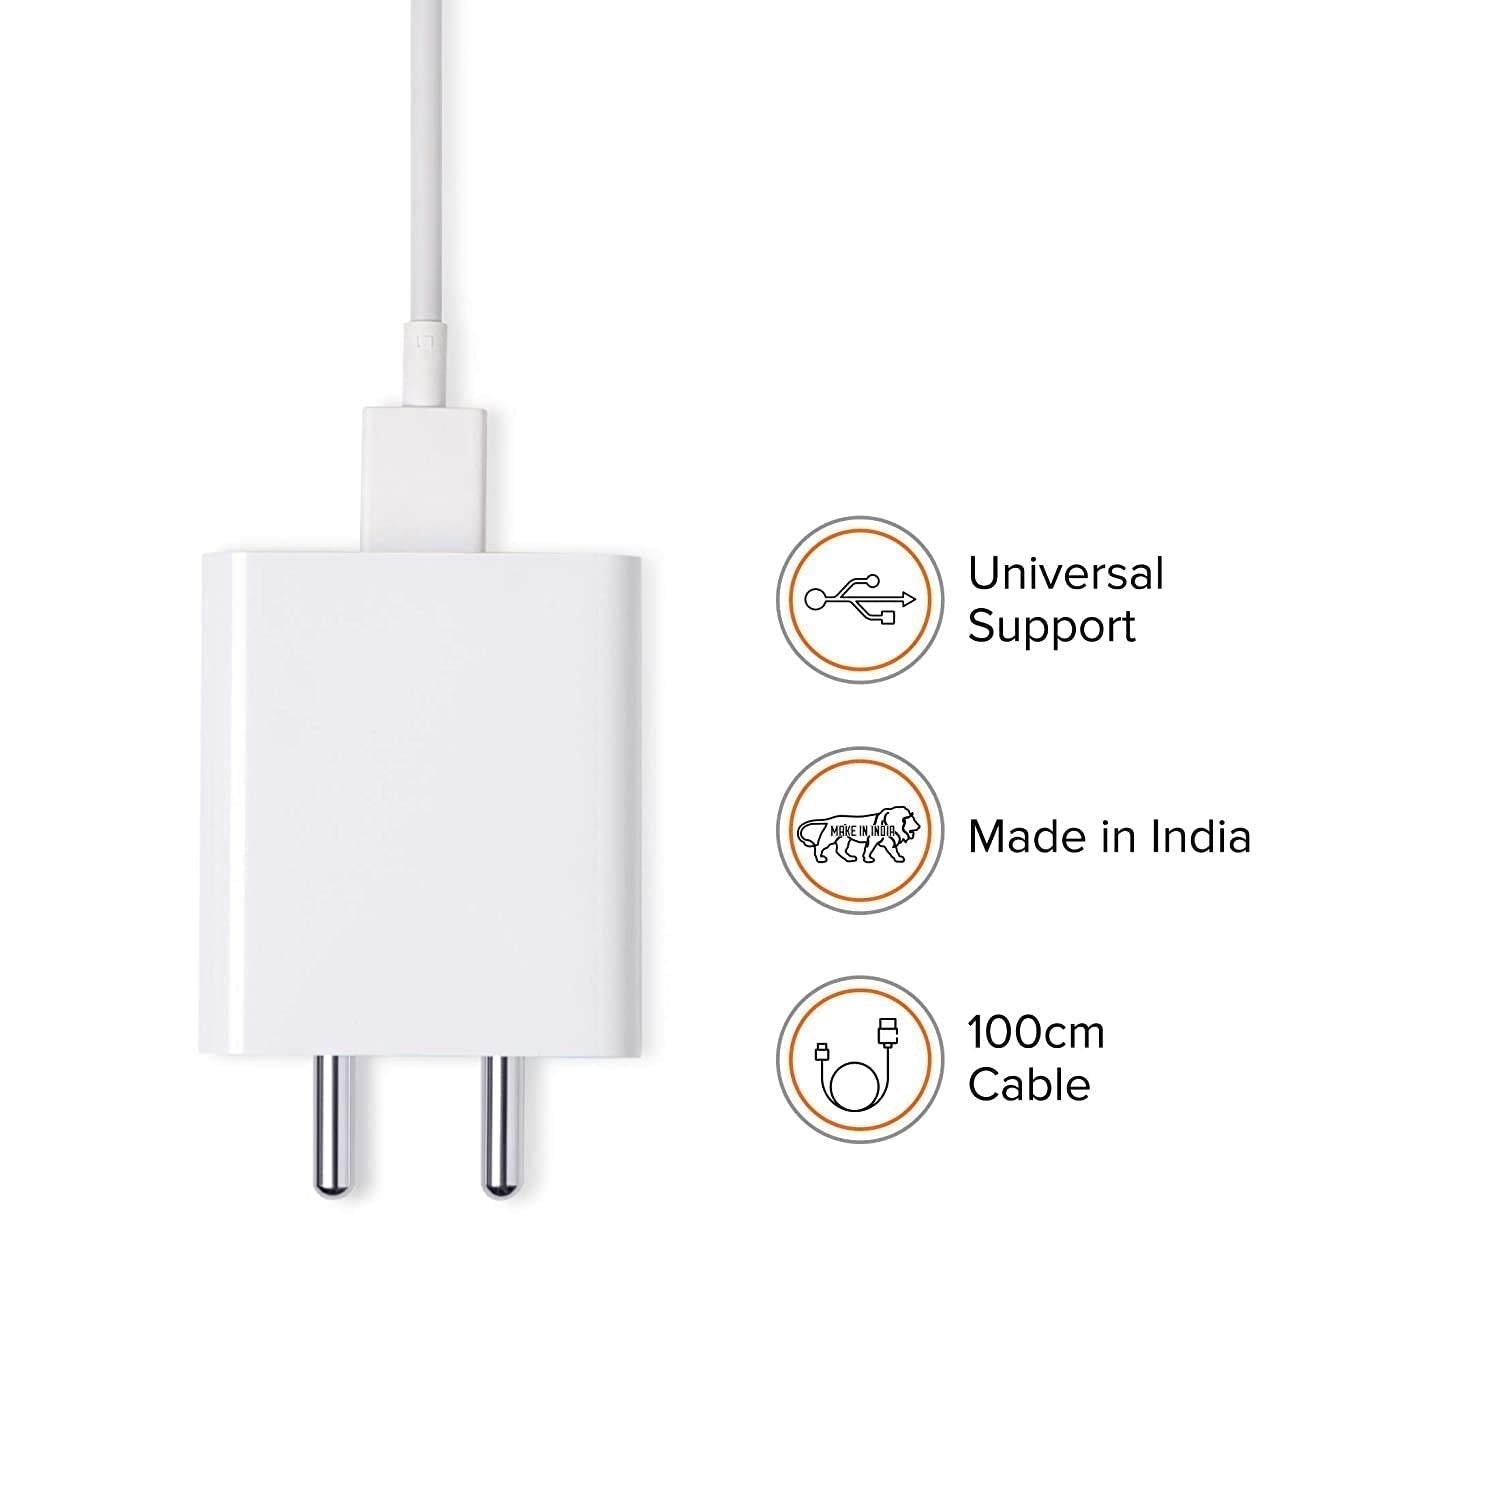 Poco M2 Pro Superfast 33W Support SonicCharge 2.0 Charger With Type-C Cable